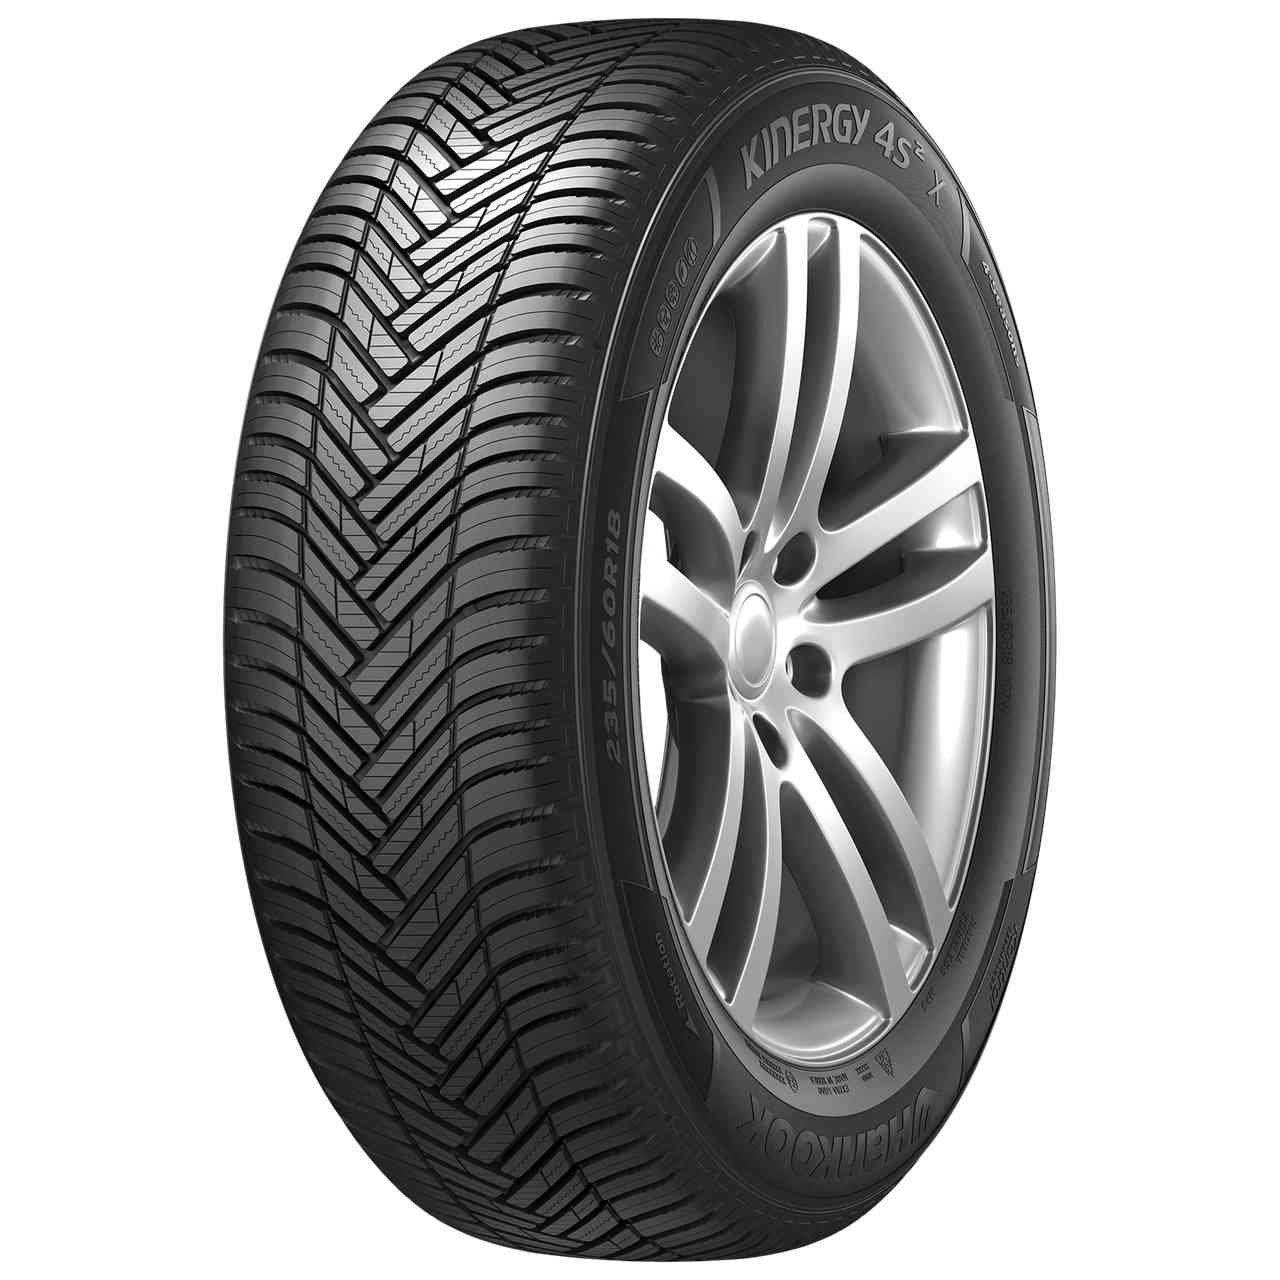 HANKOOK KINERGY 4S 2 X (H750A) 235/55R18 104V BSW XL